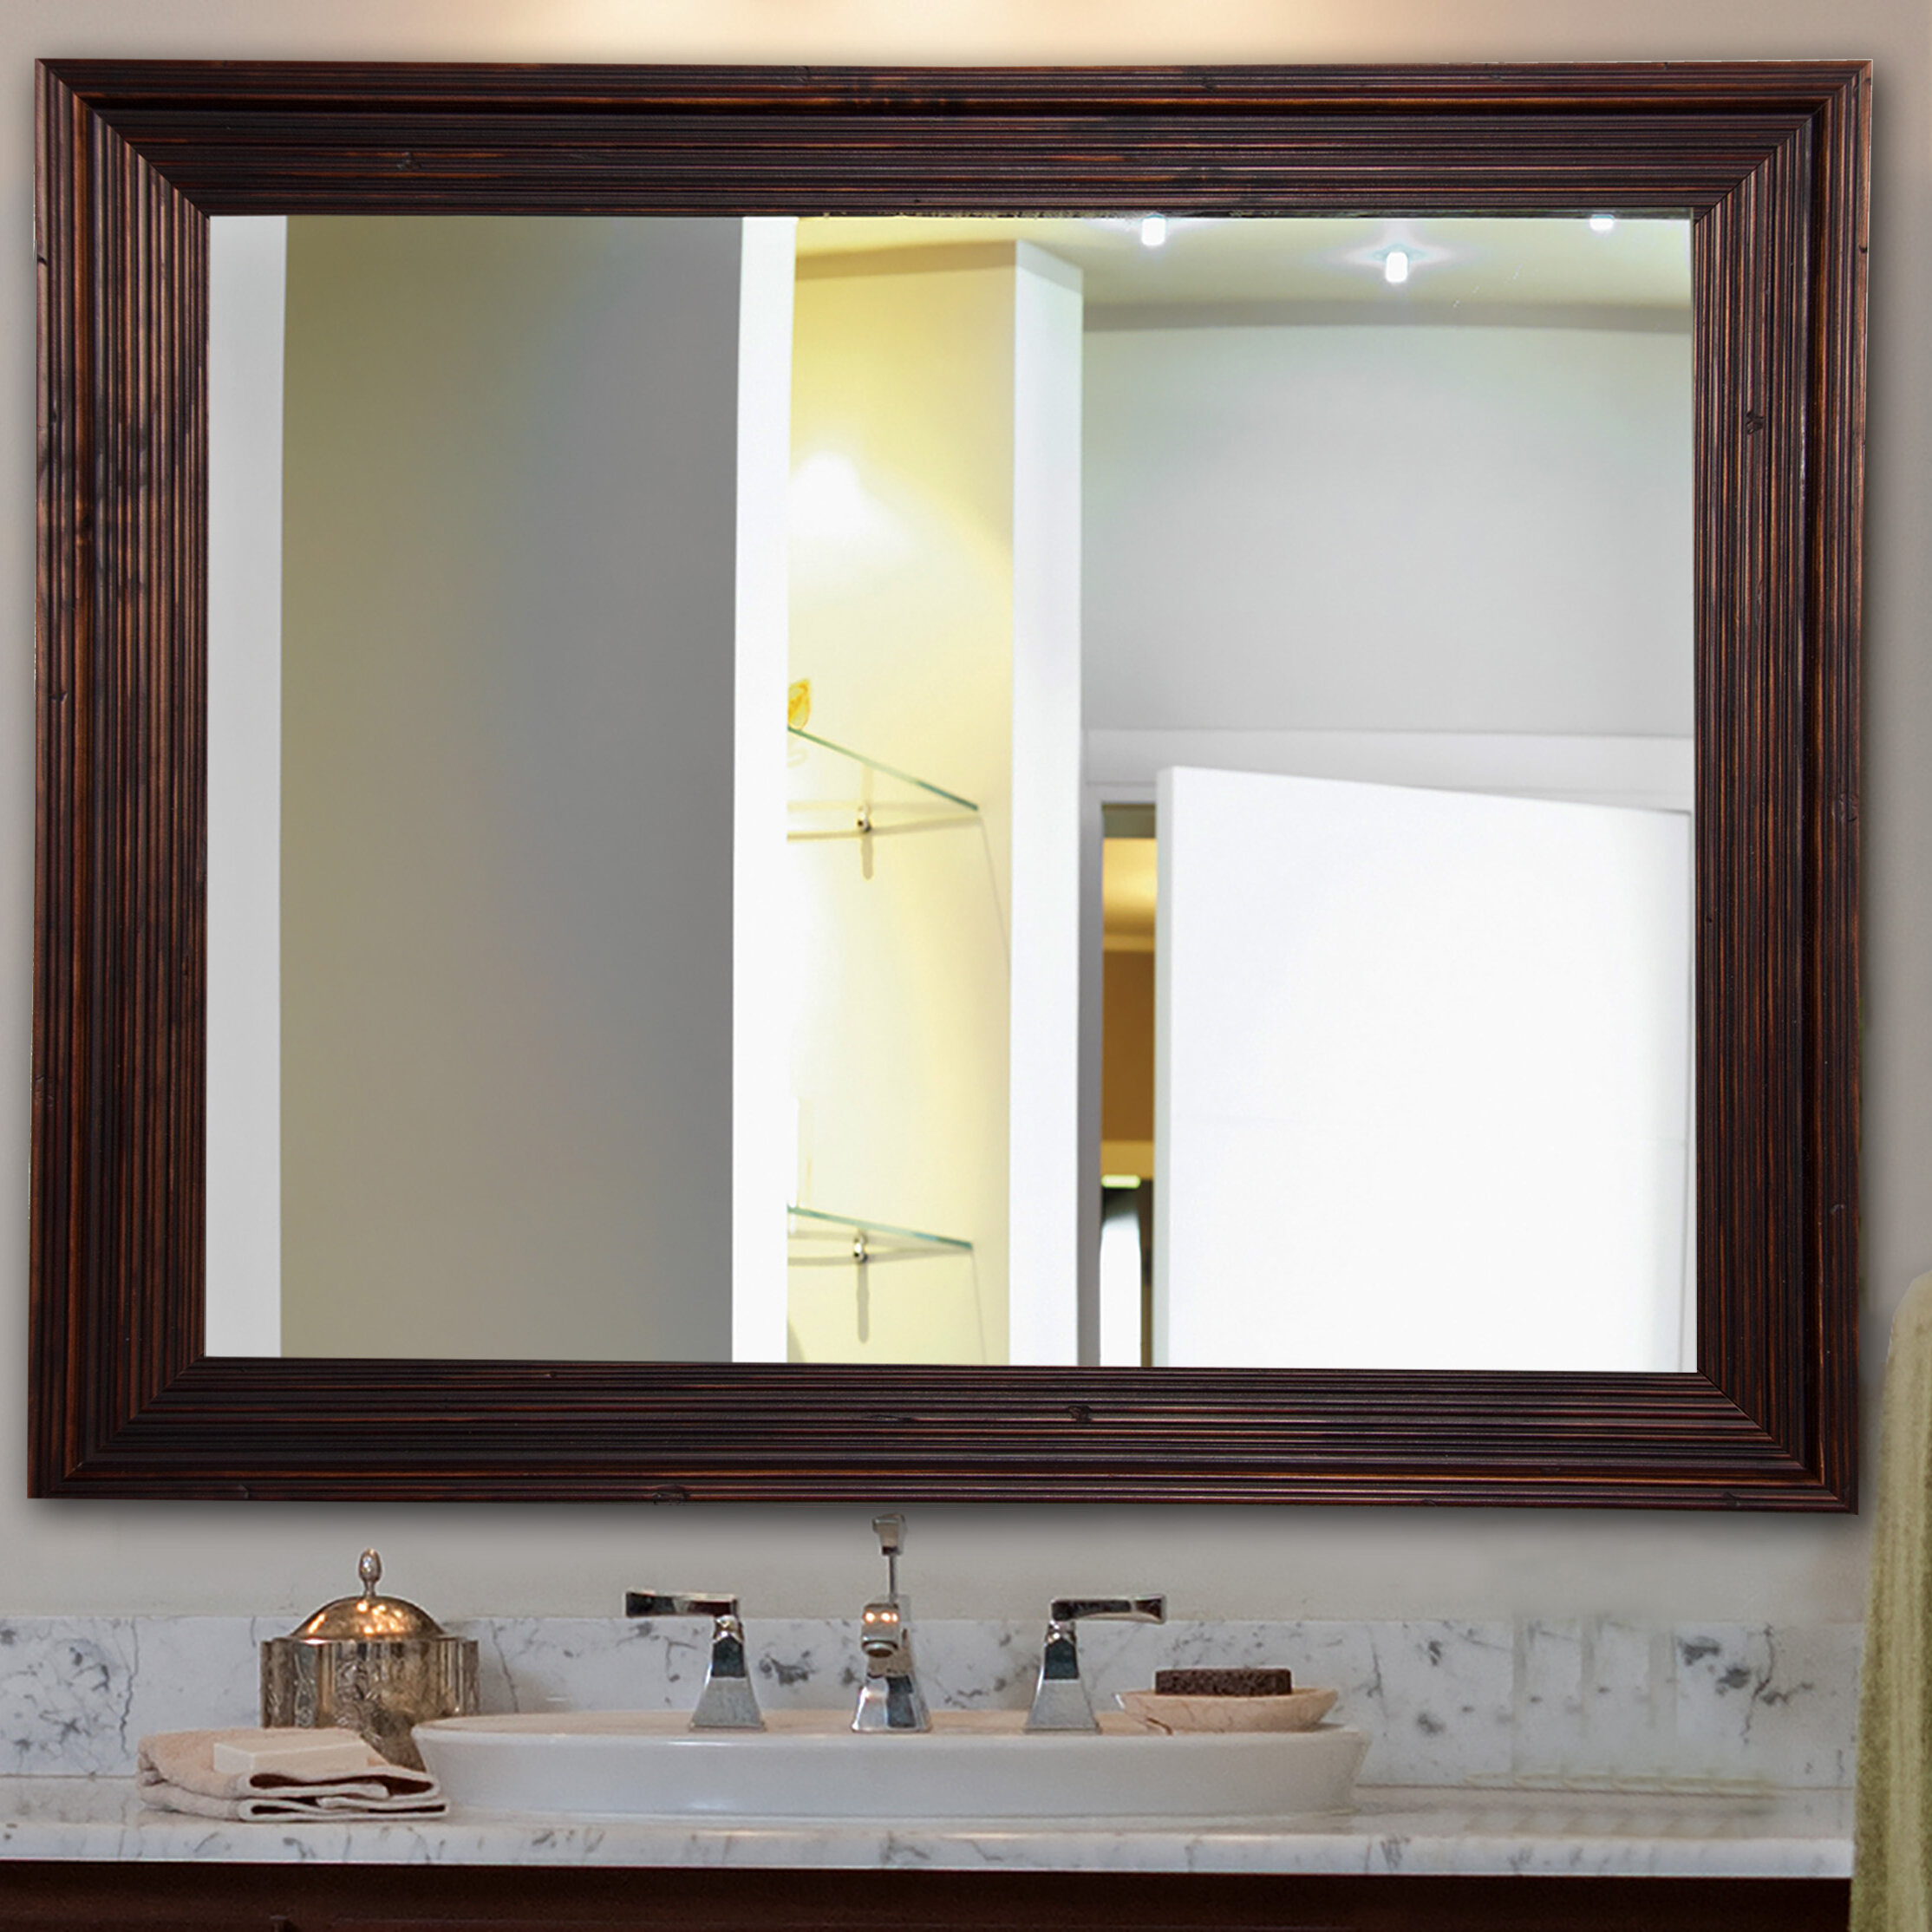 Darby Home Co Handcrafted Dark Brown Rustic Accent Mirror